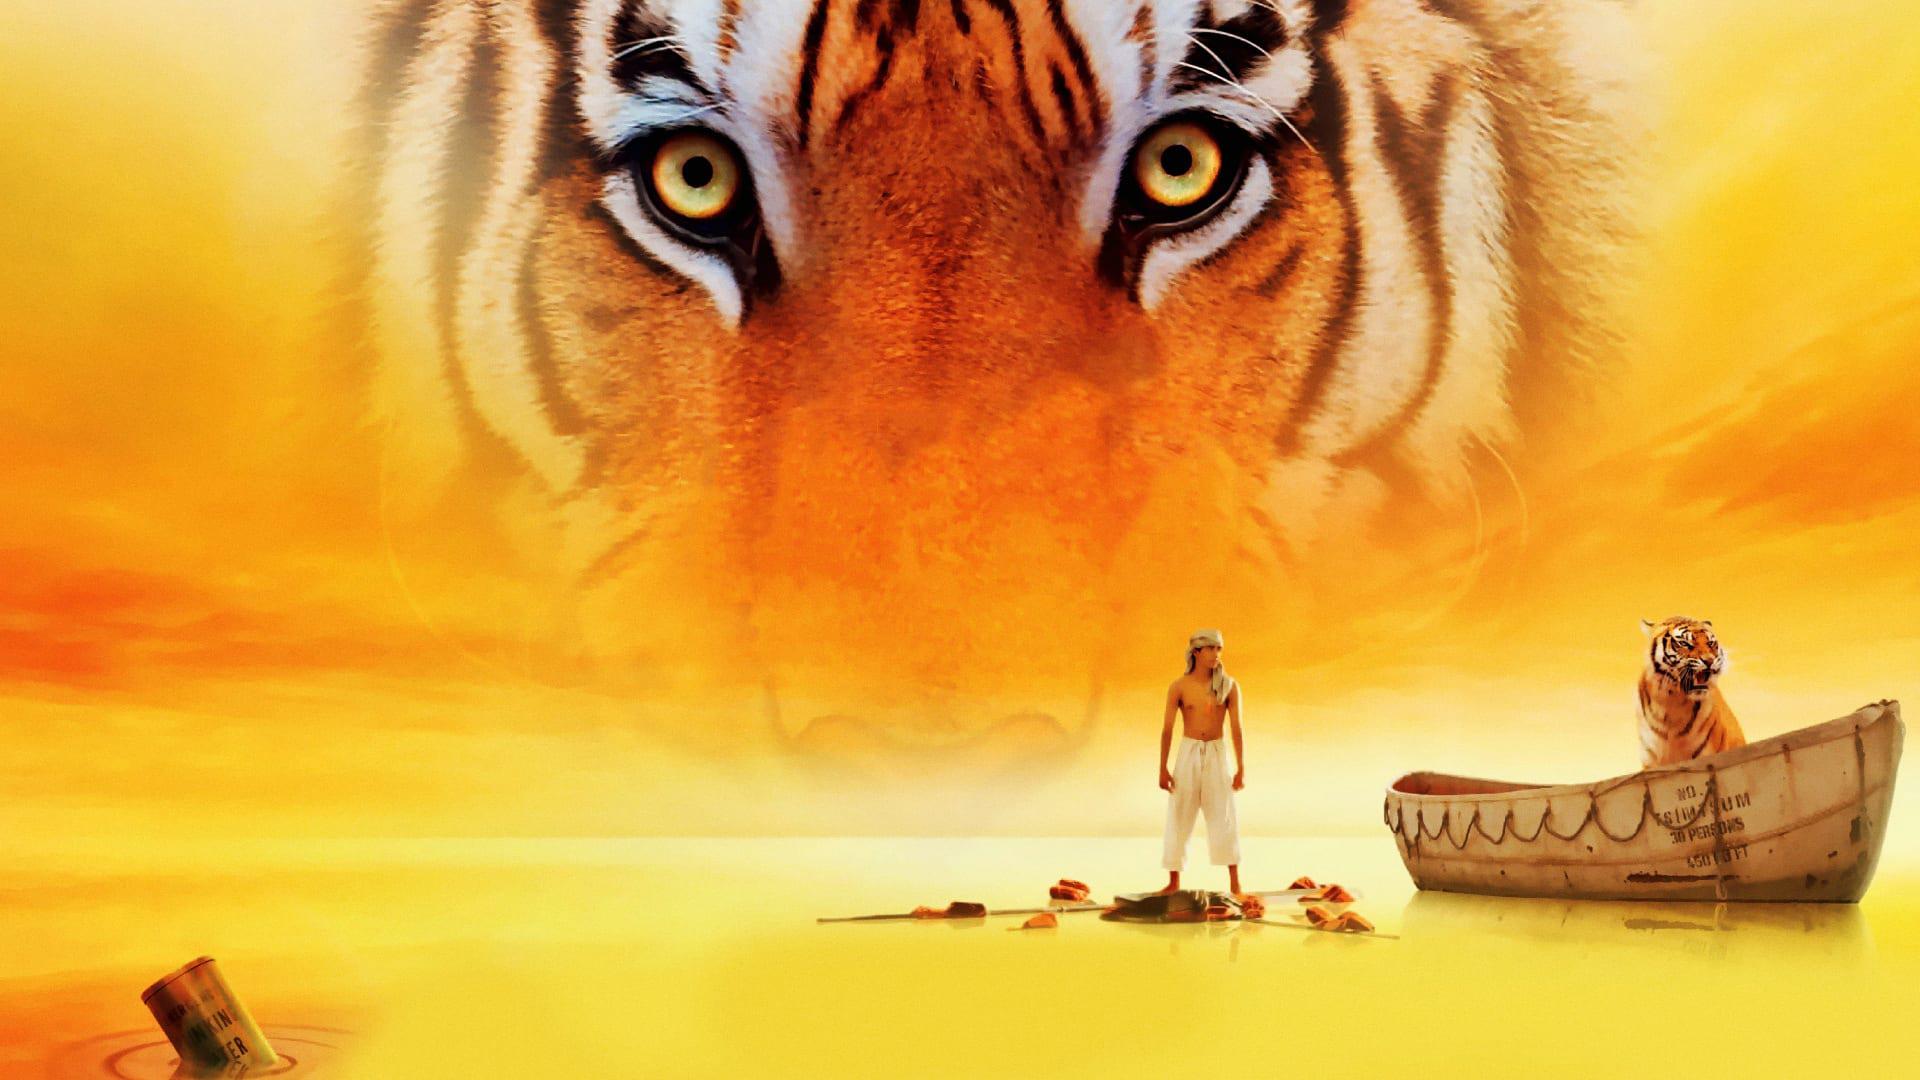 Backdrop Image for Life of Pi